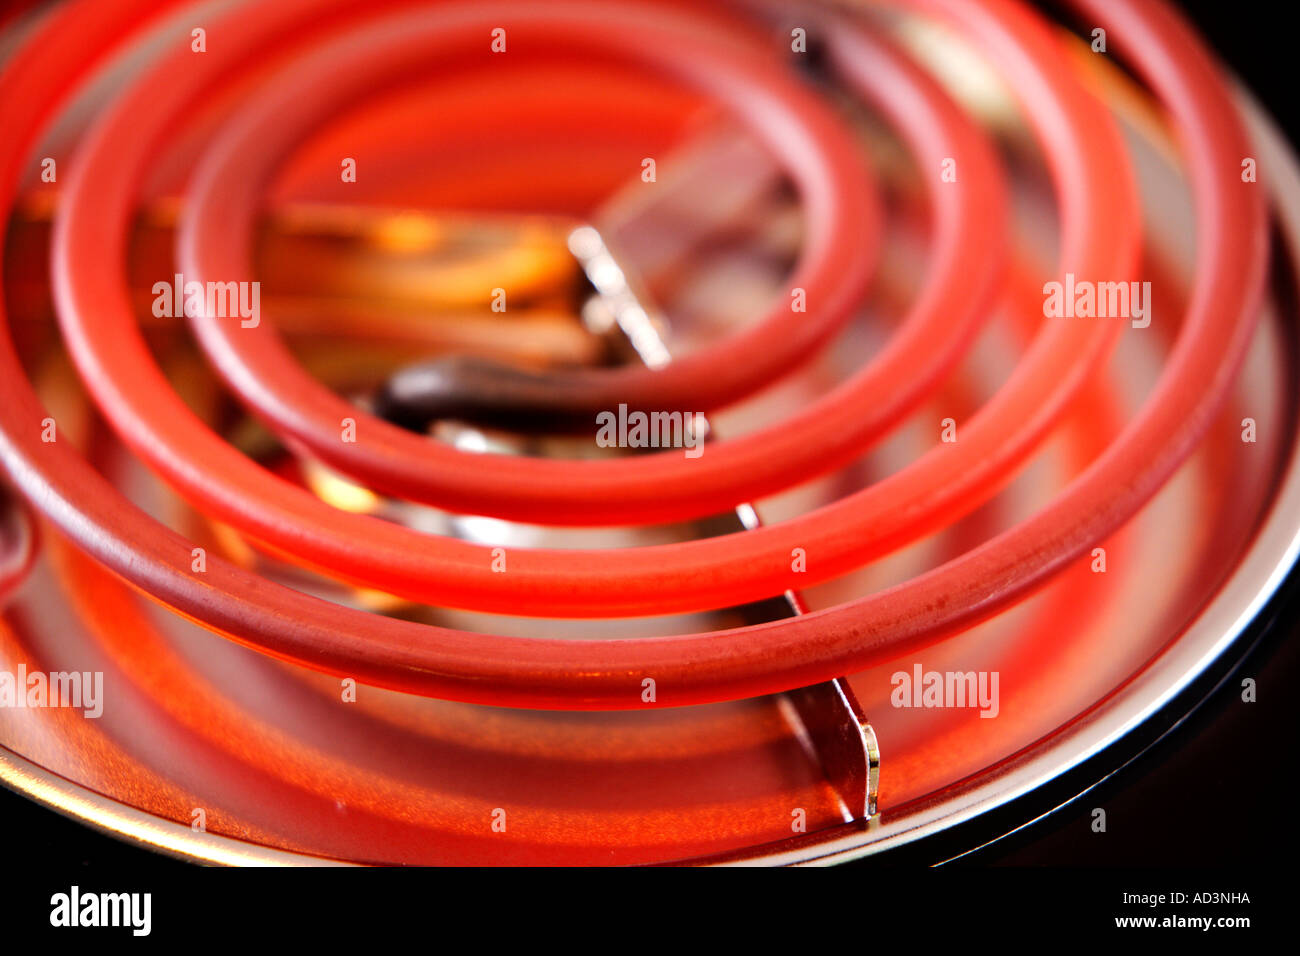 glowing-heating-element-on-electric-stove-stock-photo-alamy